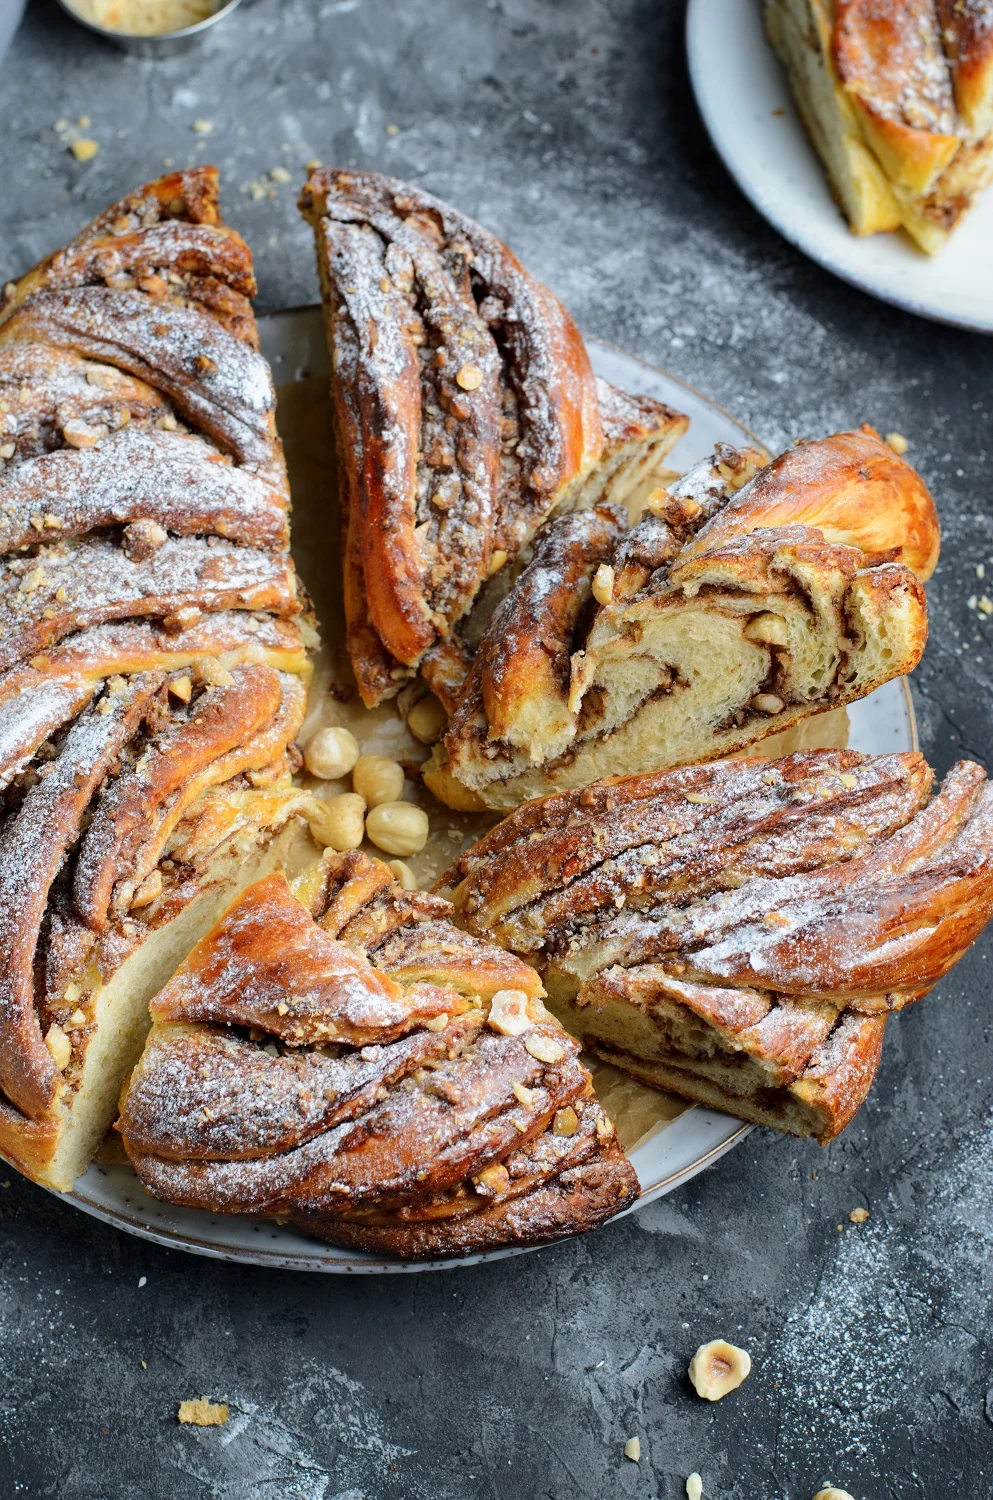 This Nutella® Hazelnut Wreath recipe is an impressive treat that’s perfect for any brunch, celebration, or holiday gathering. It’s a stunning, sweet, chocolate, and nutty bread for friends and family to indulge in. via @Mooreorlesscook